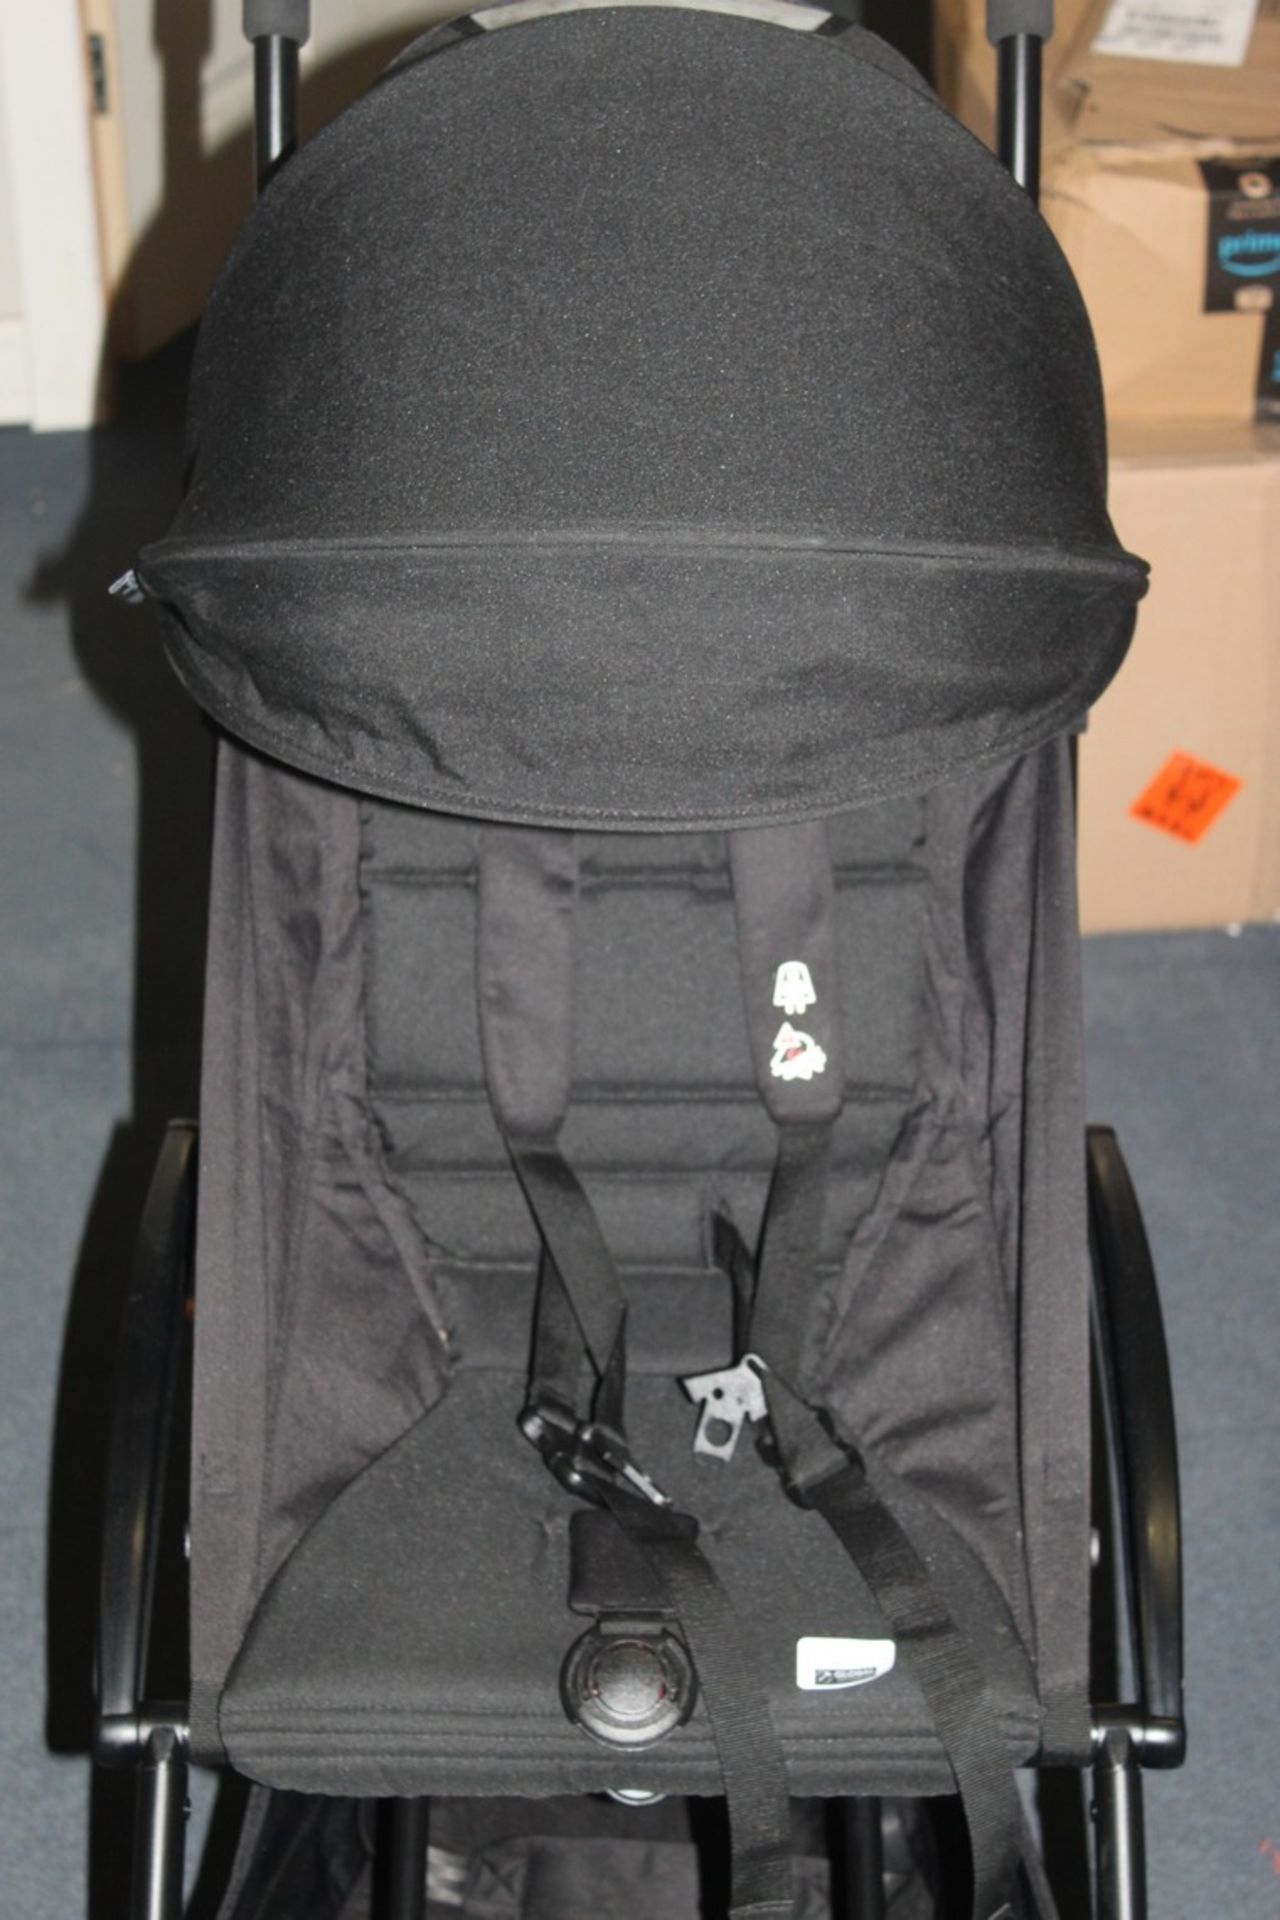 YOYO Black Stroller RRP £390 (49976) (Public Viewings & Appraisals Available)